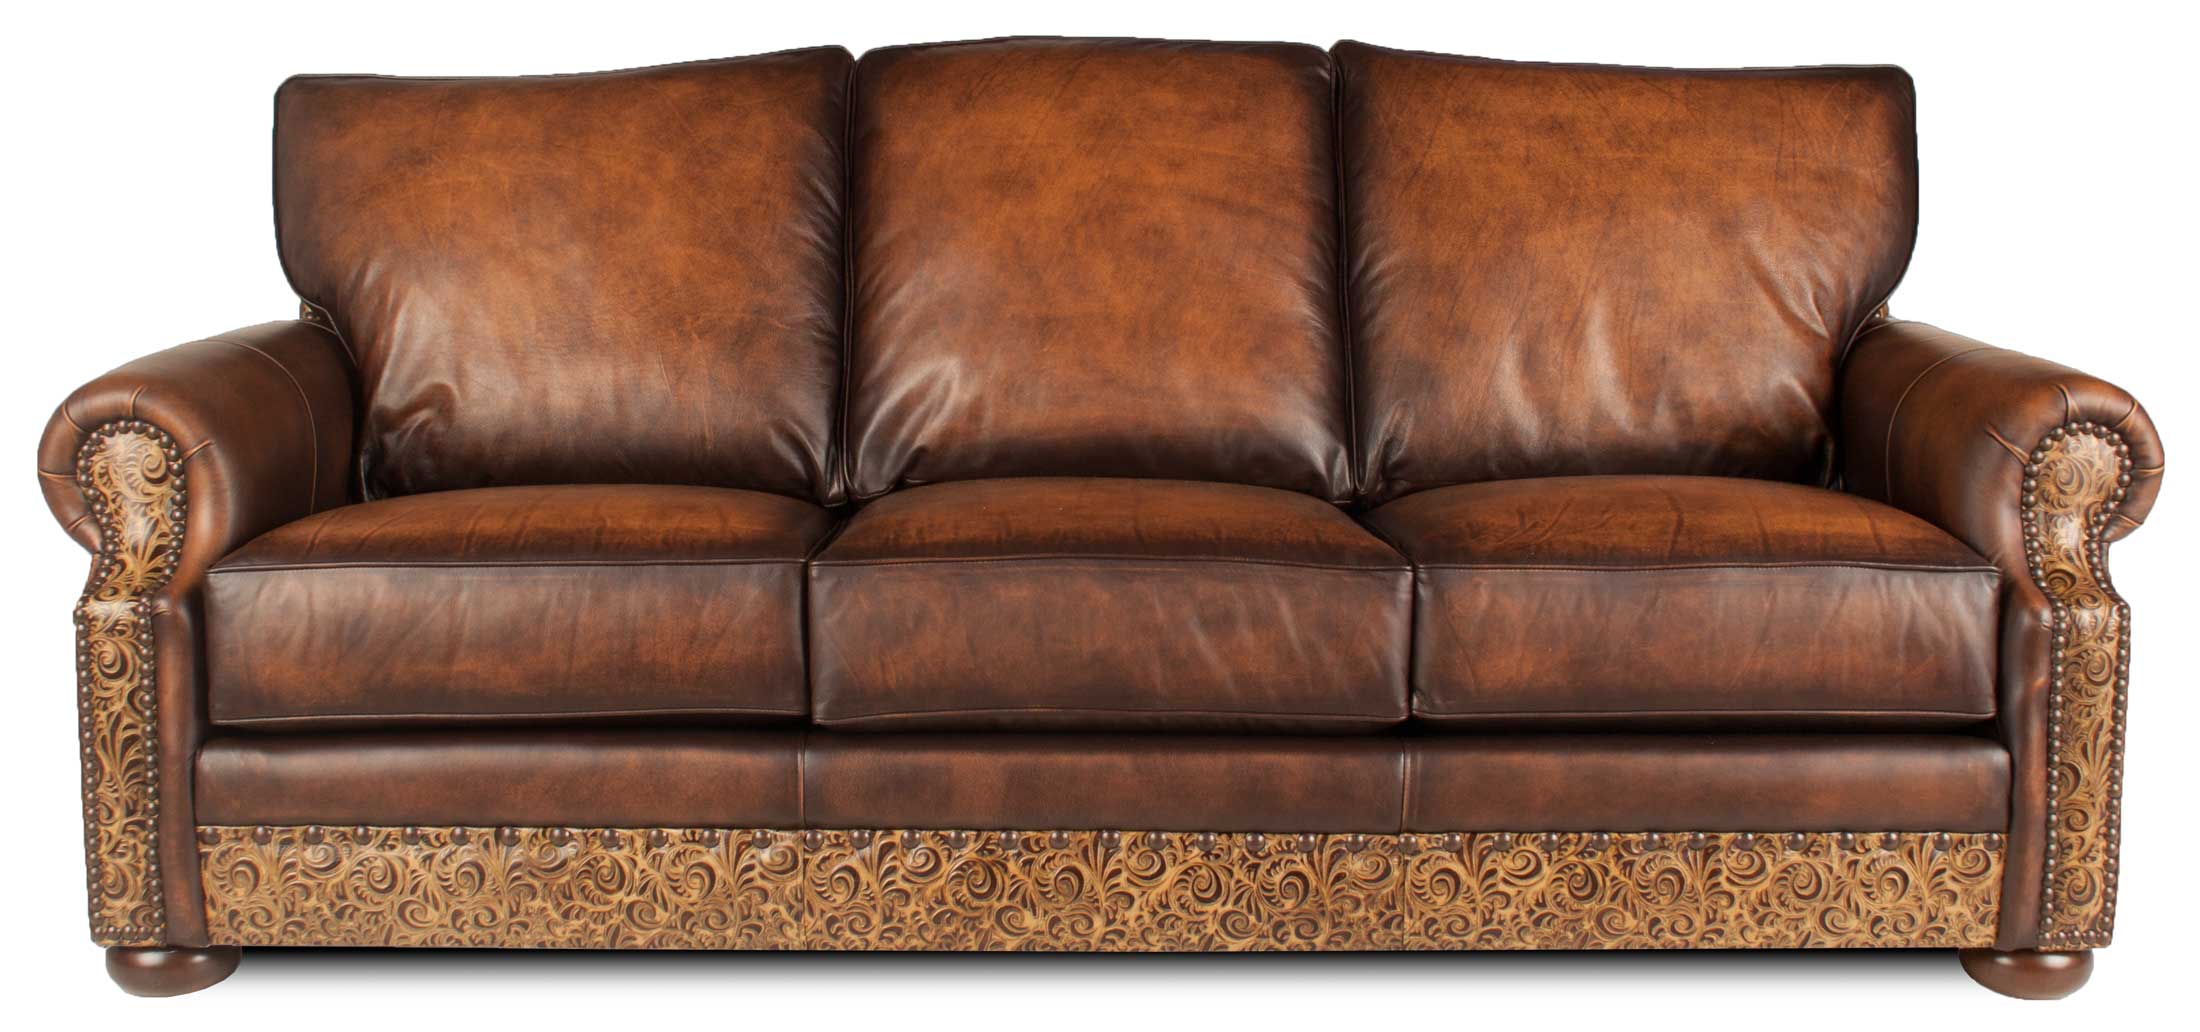 Texas Hill Country Collection, Tooled Leather Furniture